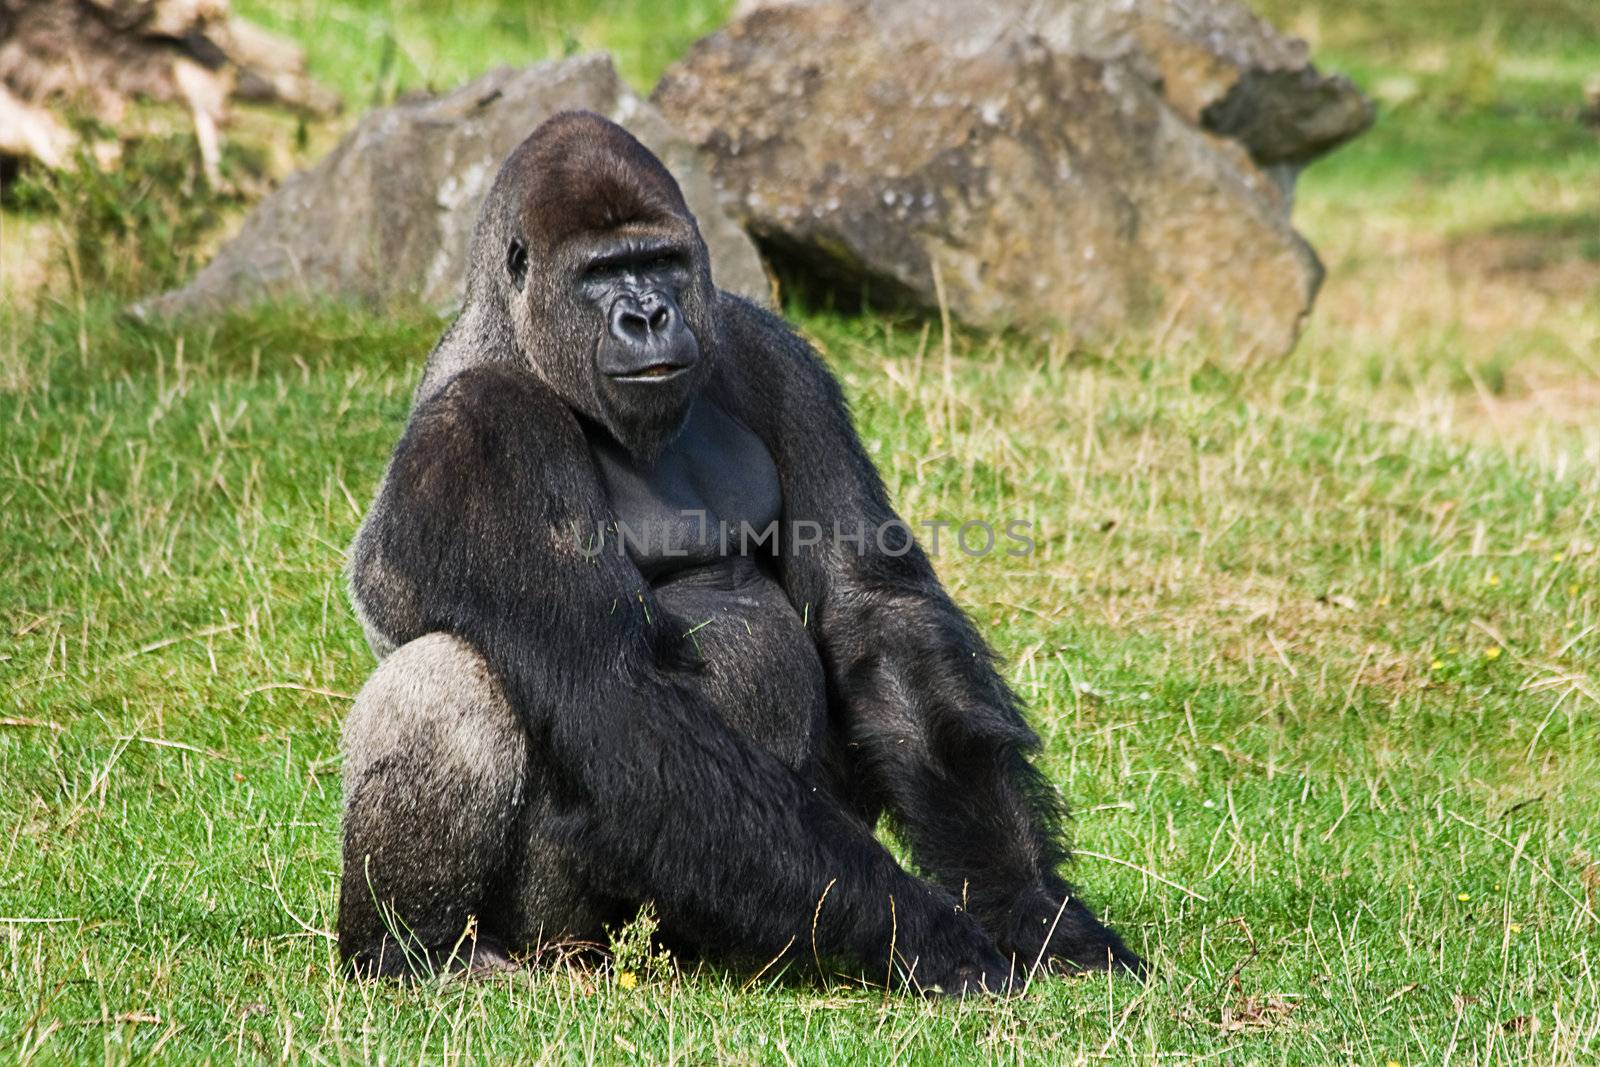 Gorilla silverback sitting on grass relaxing and looking around